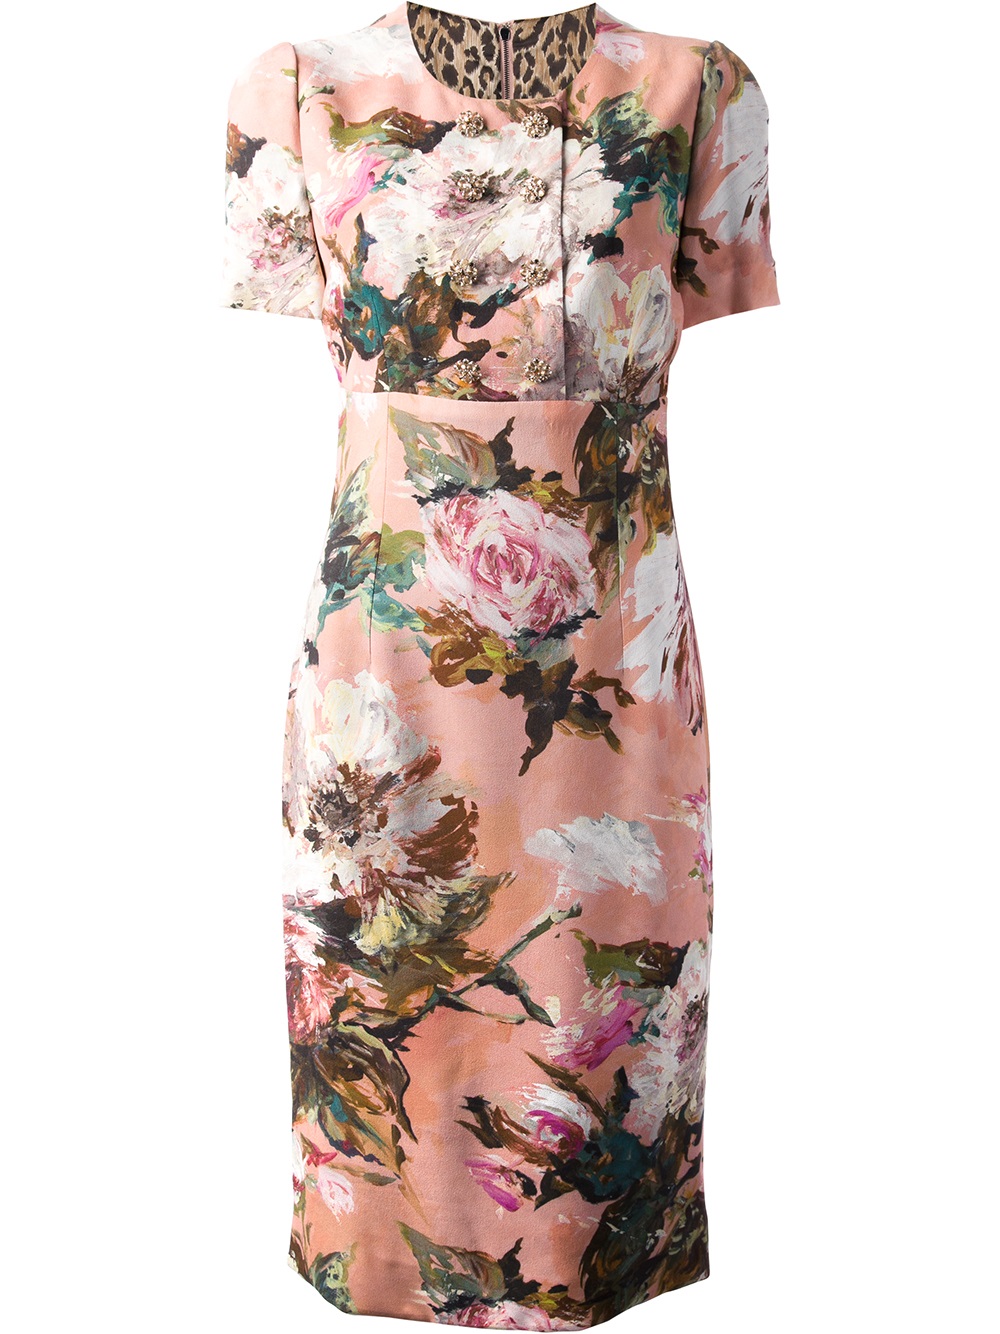 Lyst - Dolce & Gabbana Printed Mid Length Dress in Pink